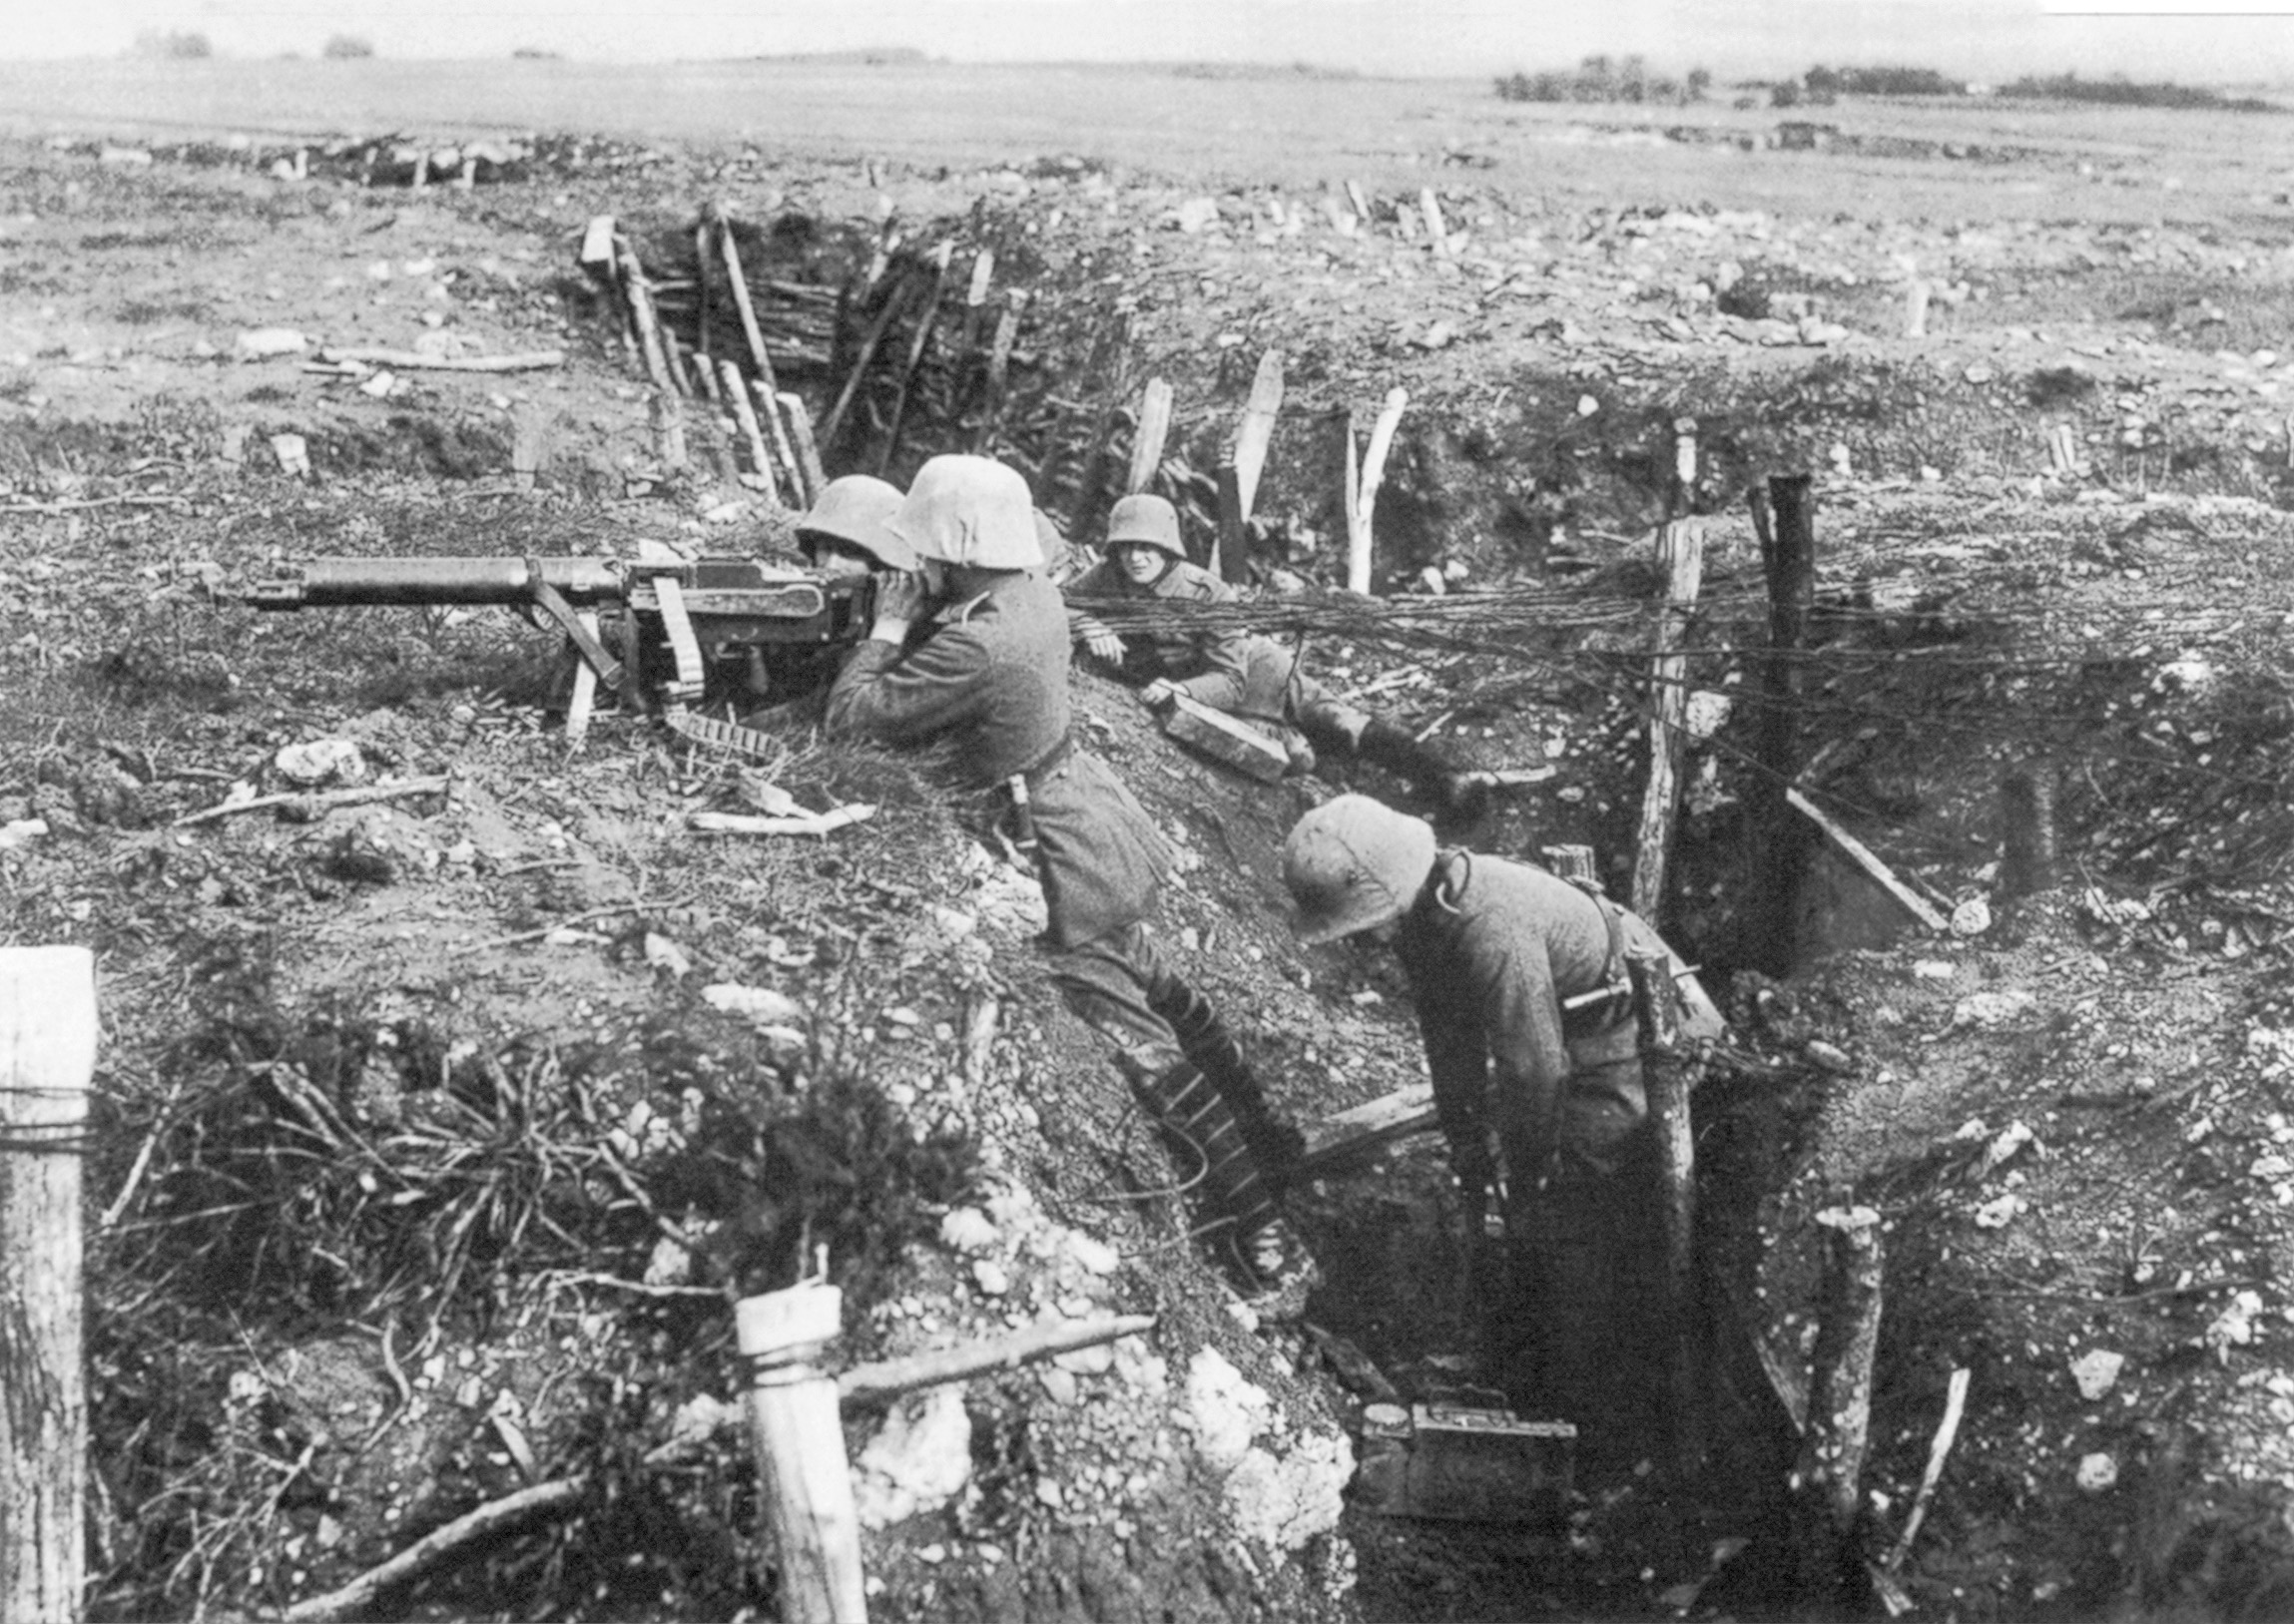 German troops stand guard with a light machine gun. Two men operate the gun and two are ready with ammunition boxes.